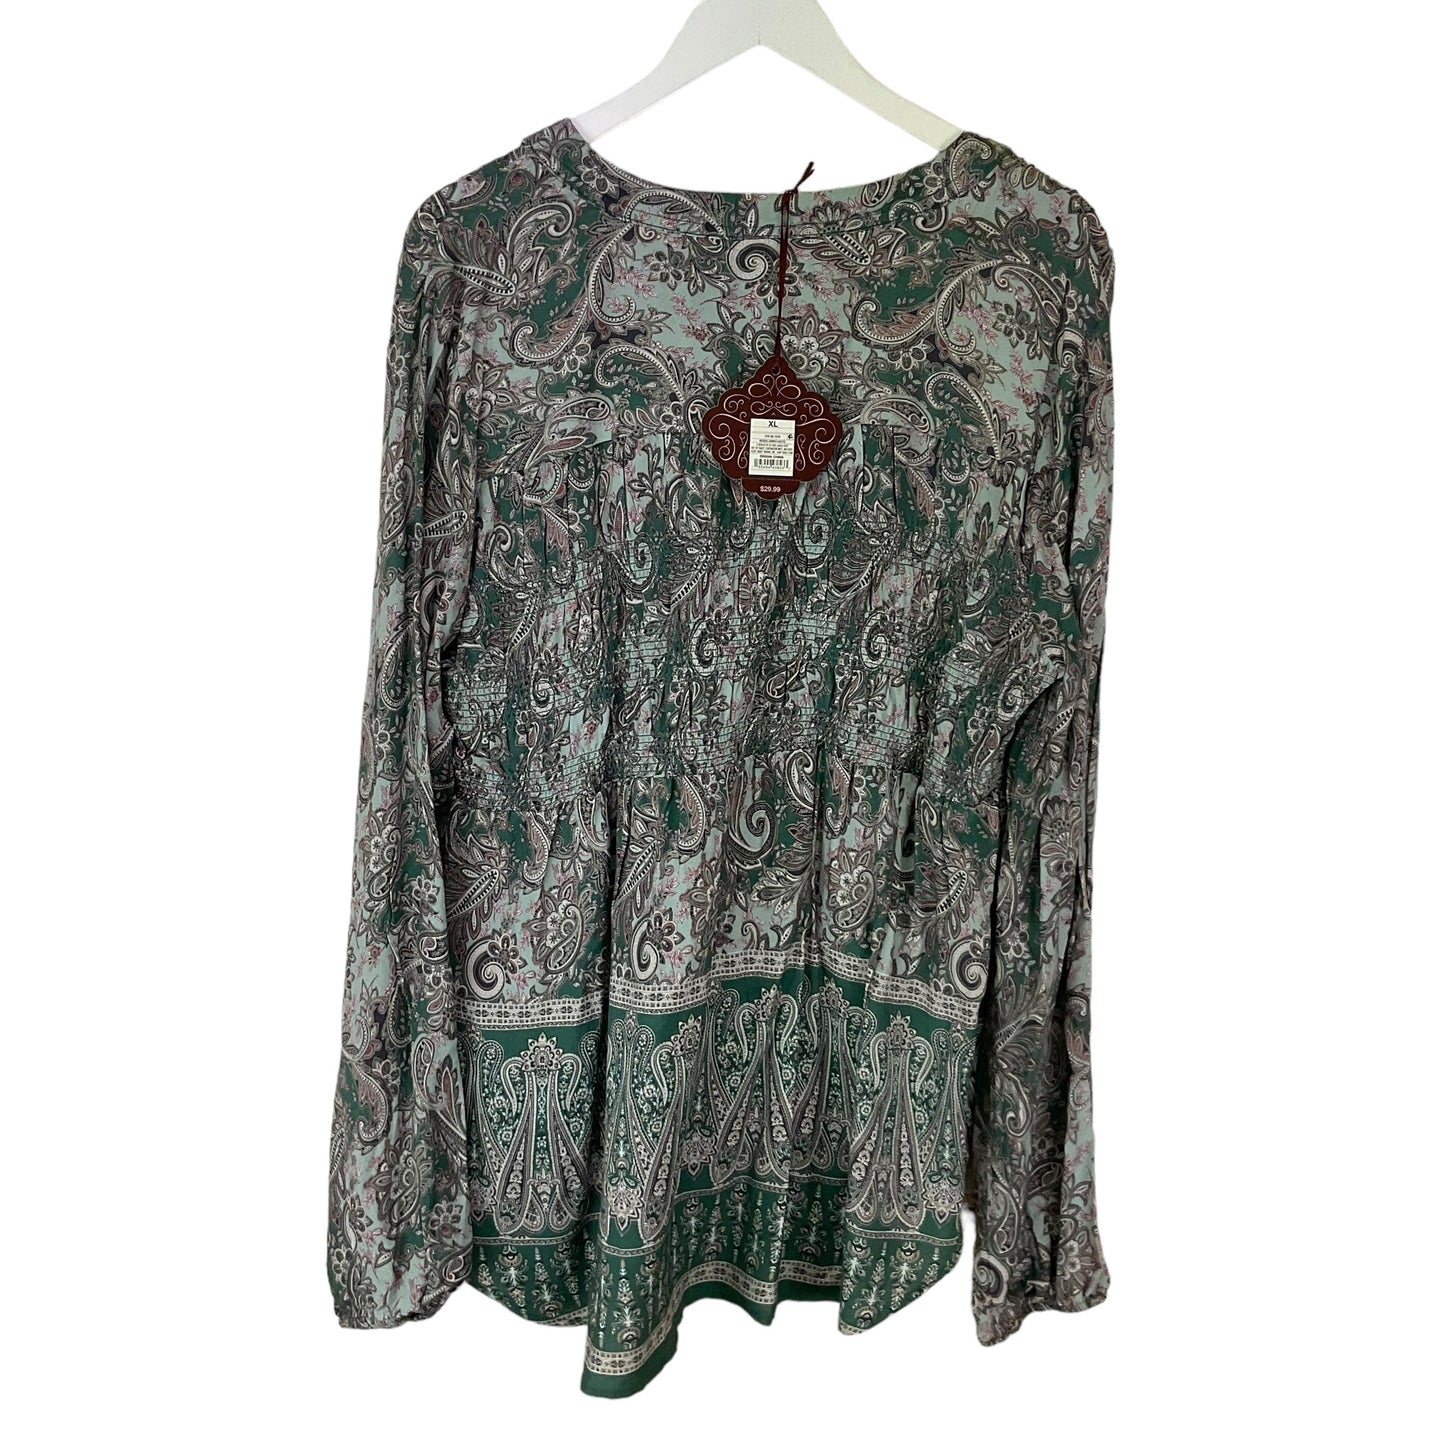 Green Top Long Sleeve Knox Rose, Size Xl